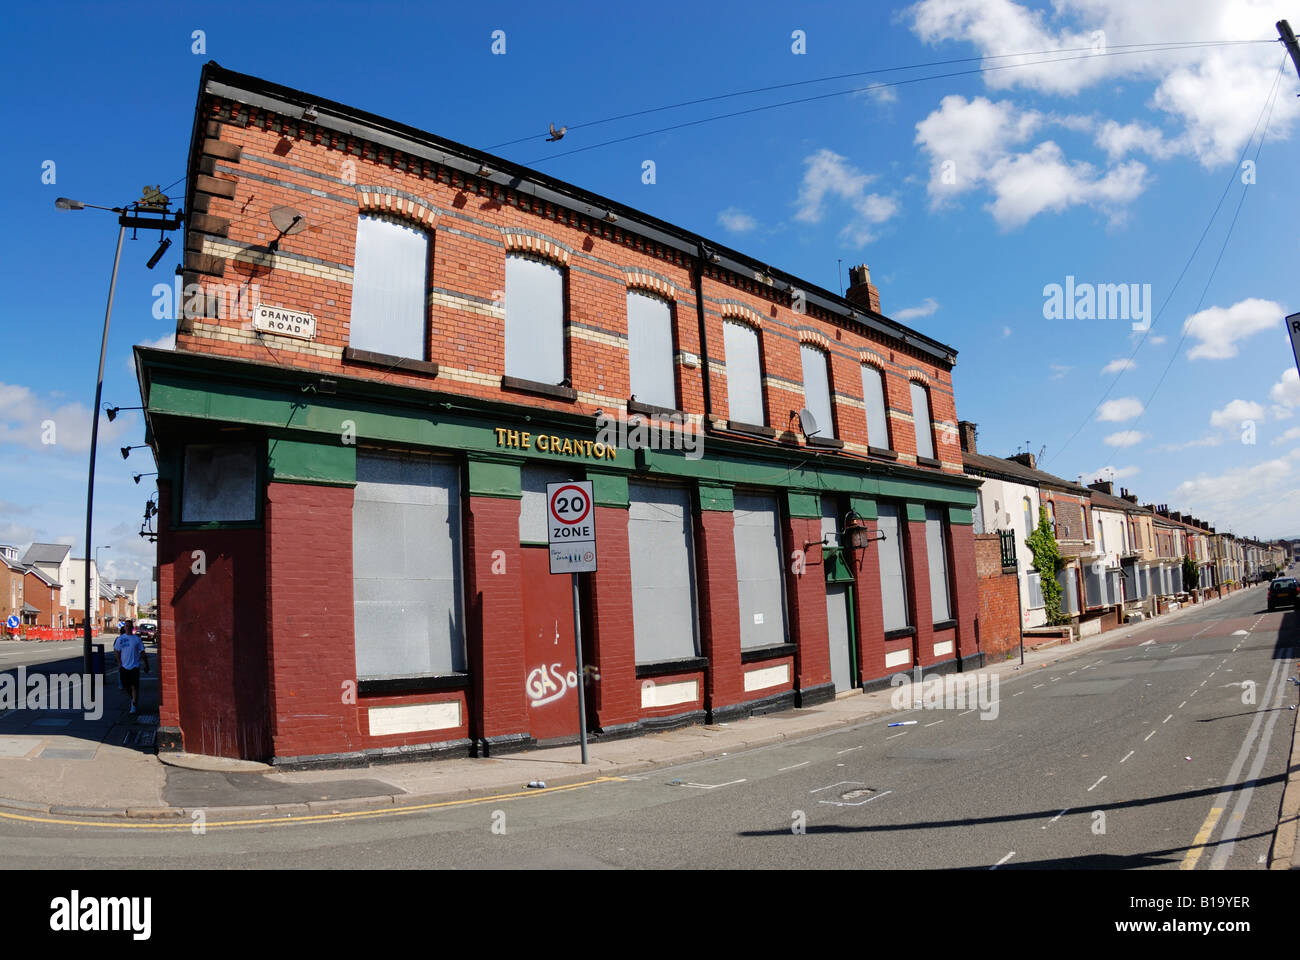 The Granton public house in Breckfield district of Liverpool closed, vacated and boarded up. Stock Photo